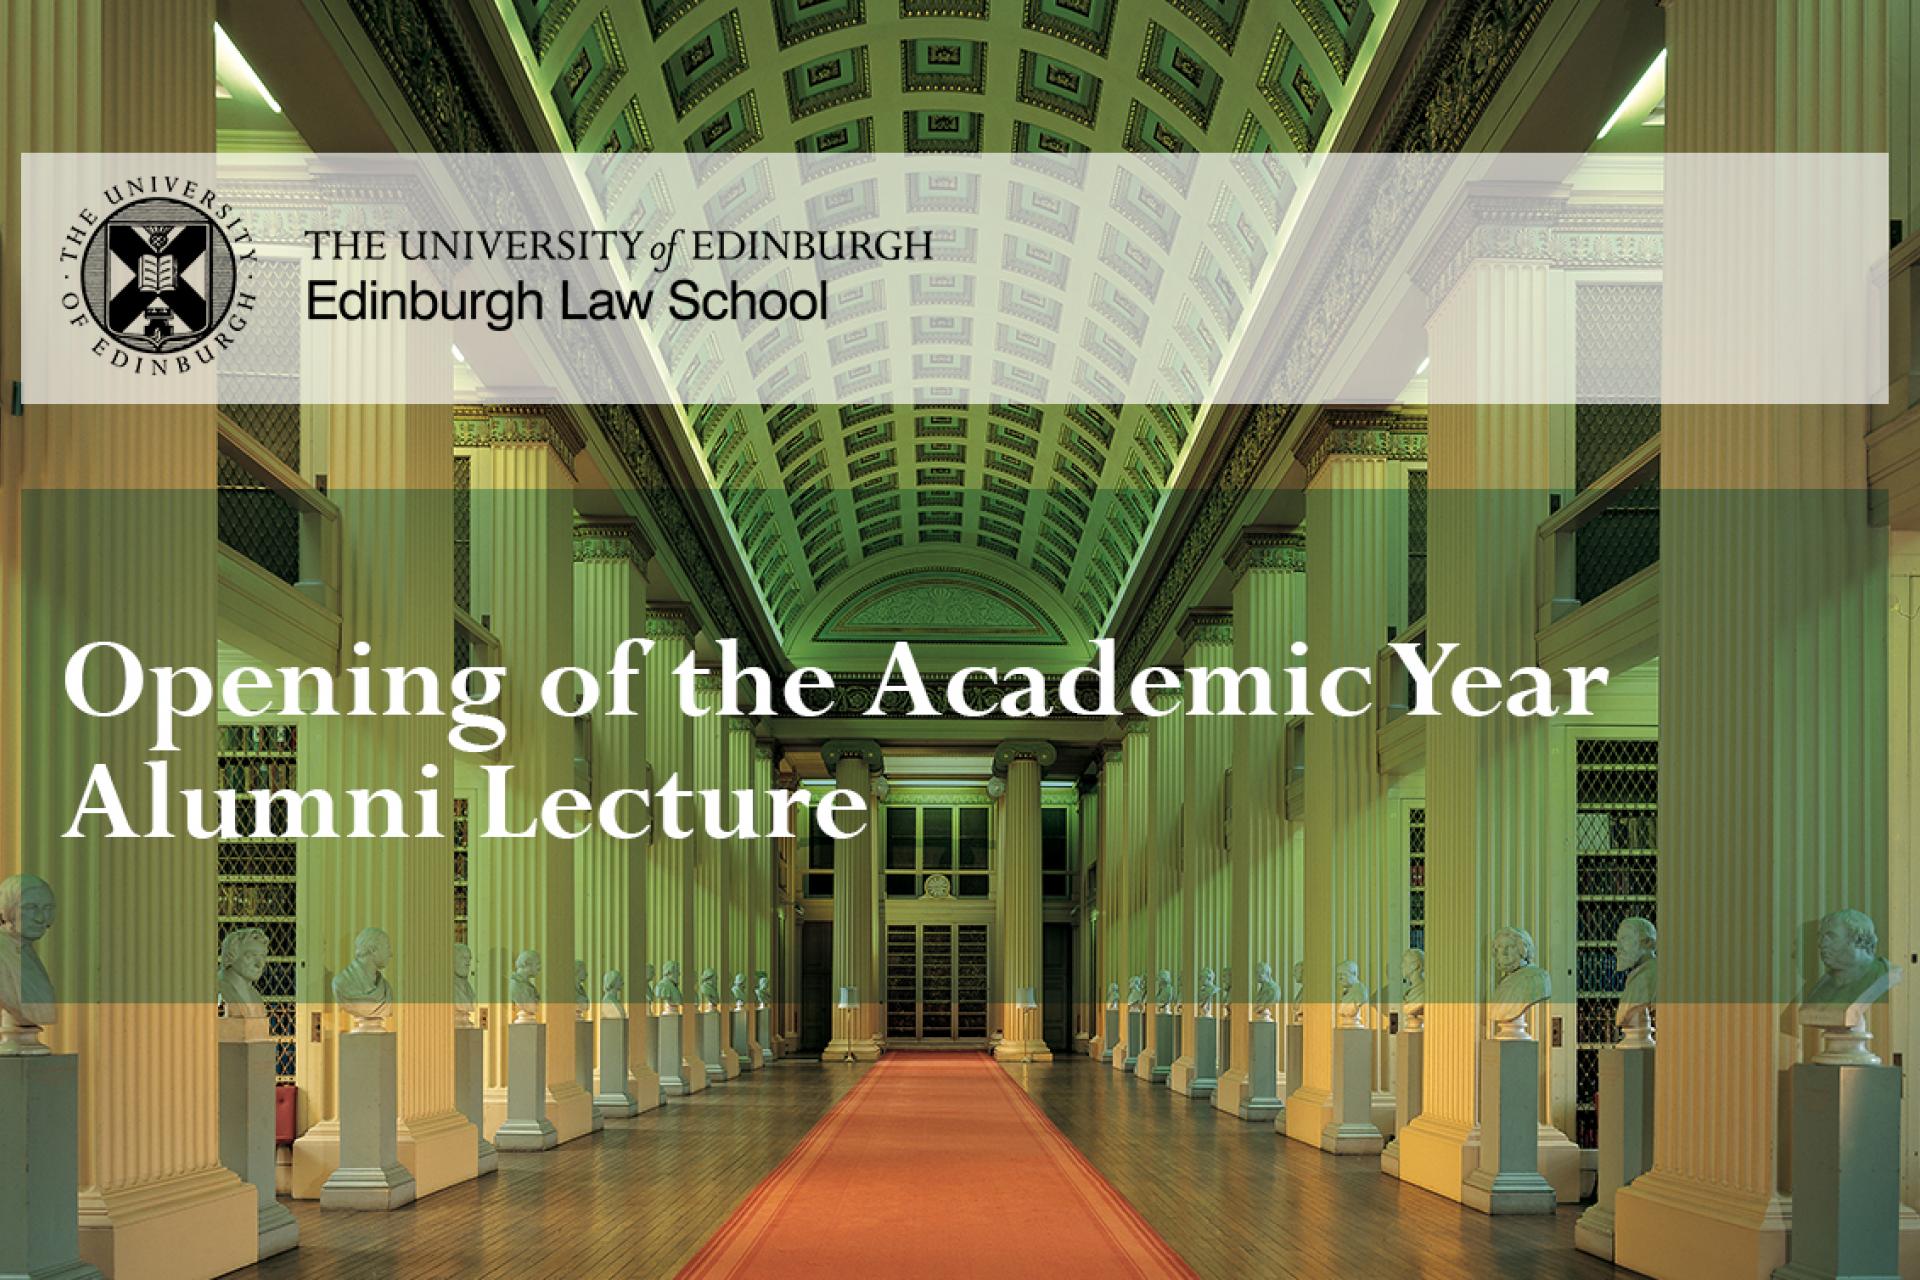 Opening of the Academic Year Alumni Lecture